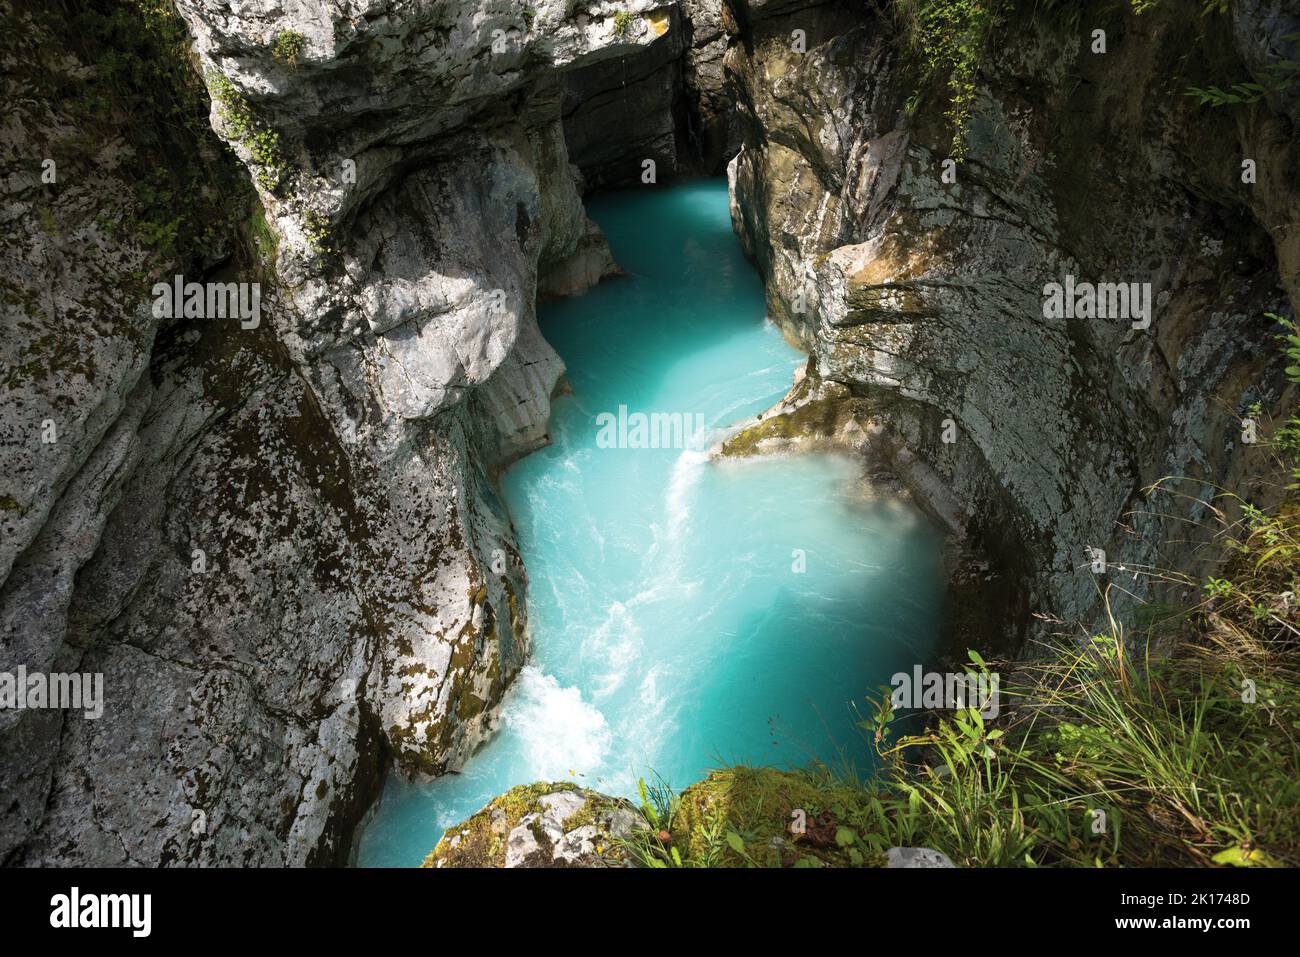 Turquoise water in the mountain gorge Stock Photo